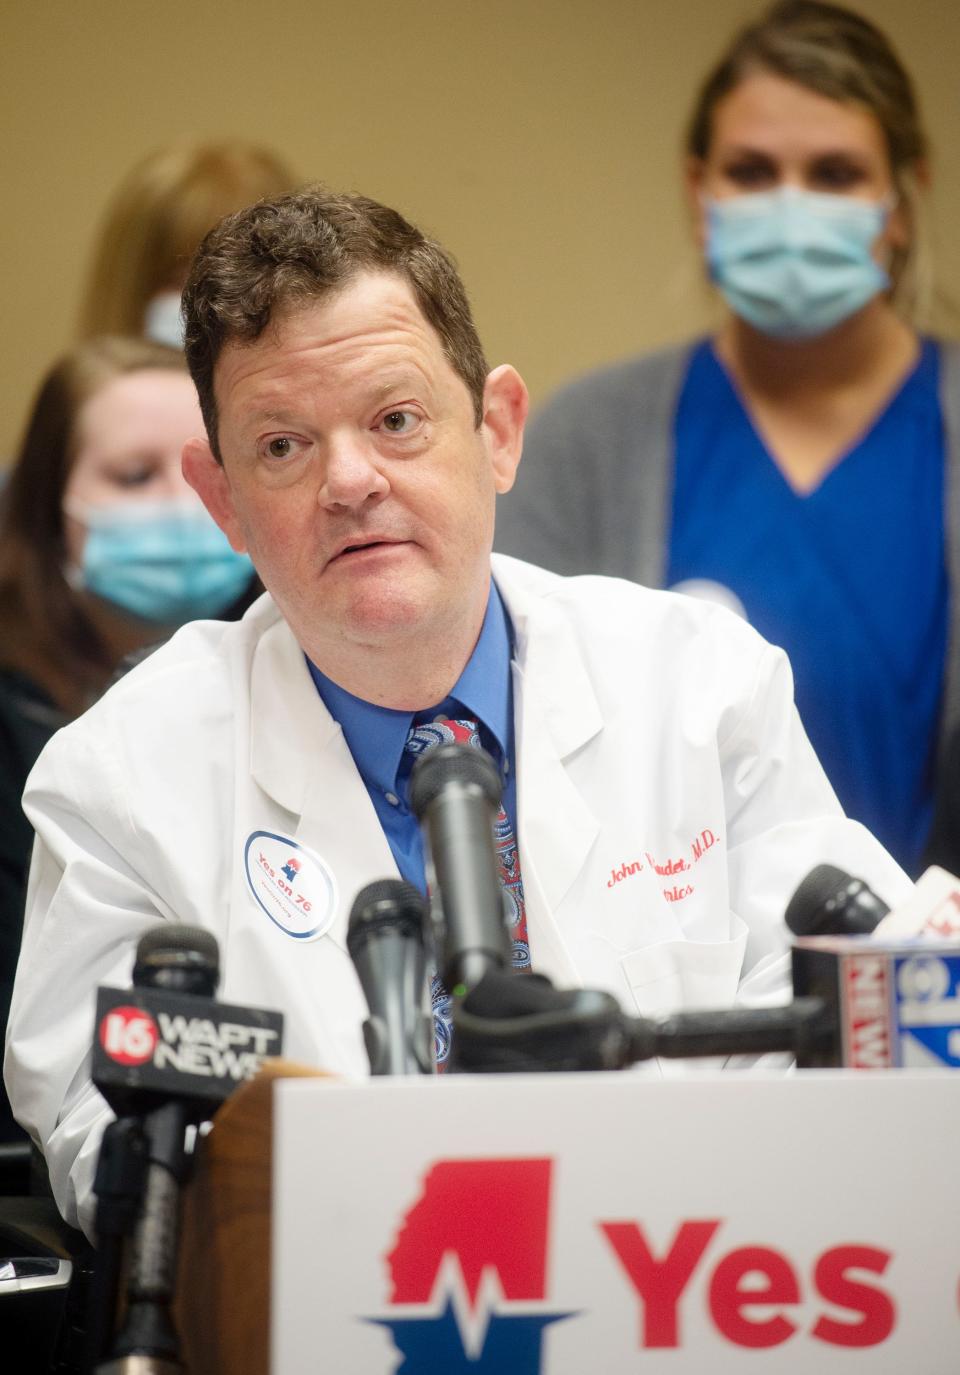 Dr. John W. Gaudet, a pediatrics specialist in Hattiesburg, speaks during a press conference about the launch of the Yes On 76 campaign at the Mississippi Hospital Association in Madison, Miss., Tuesday, May 11, 2021. On Tuesday, the House Medicaid Committee passed a bill to expand Medicaid.